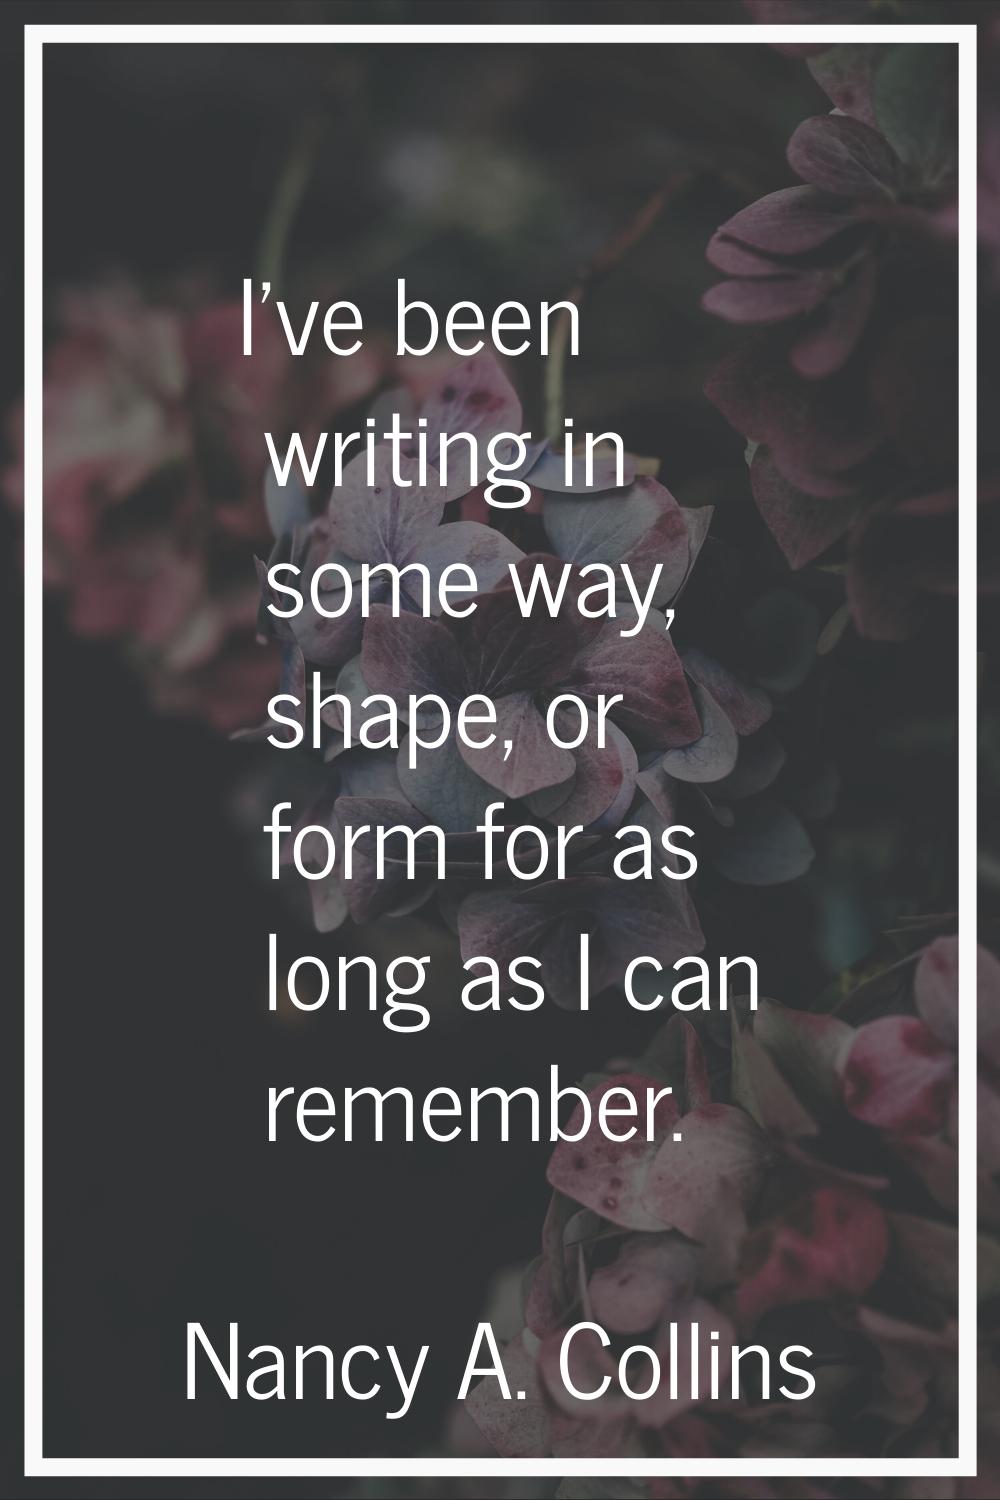 I've been writing in some way, shape, or form for as long as I can remember.